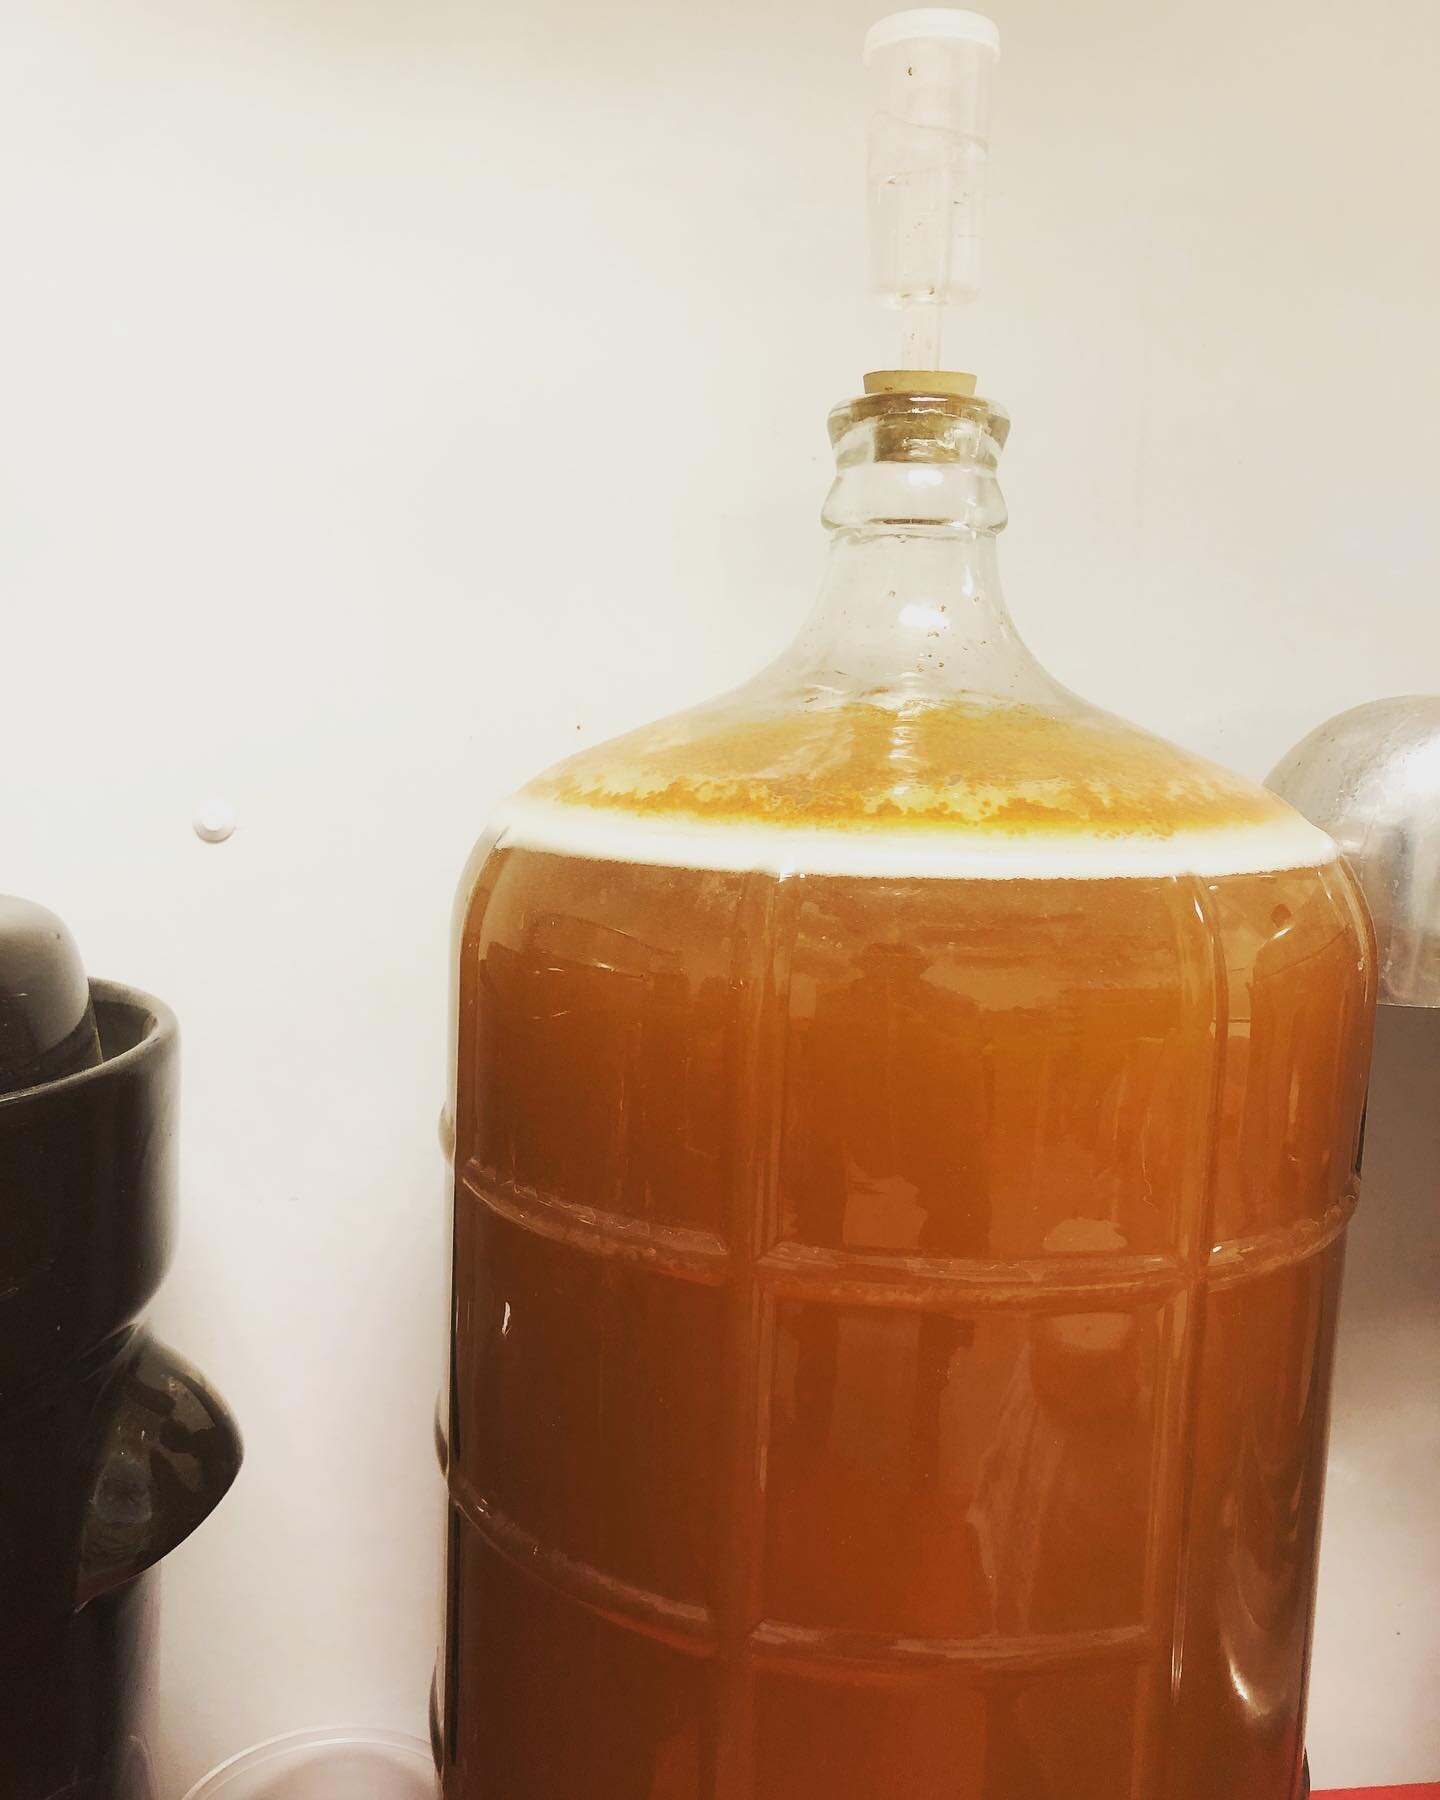 Turning last seasons apple cider into  honey wine. The cyser ferments for 6 weeks before reaching and aging for a year.